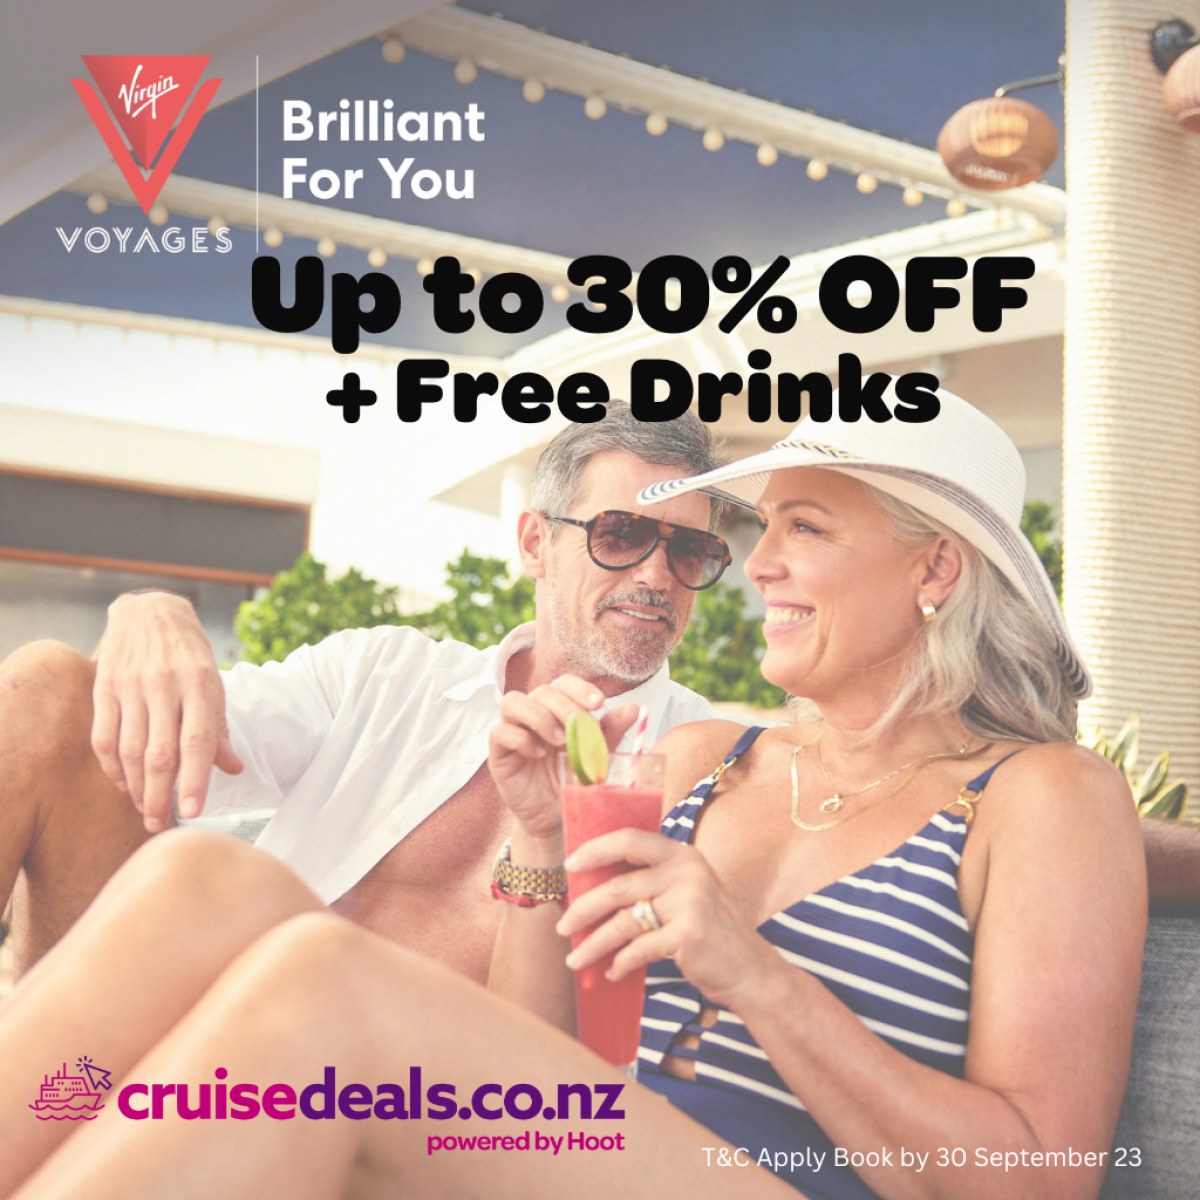 Up to 30% Off Virgin Voyages & Free Drinks